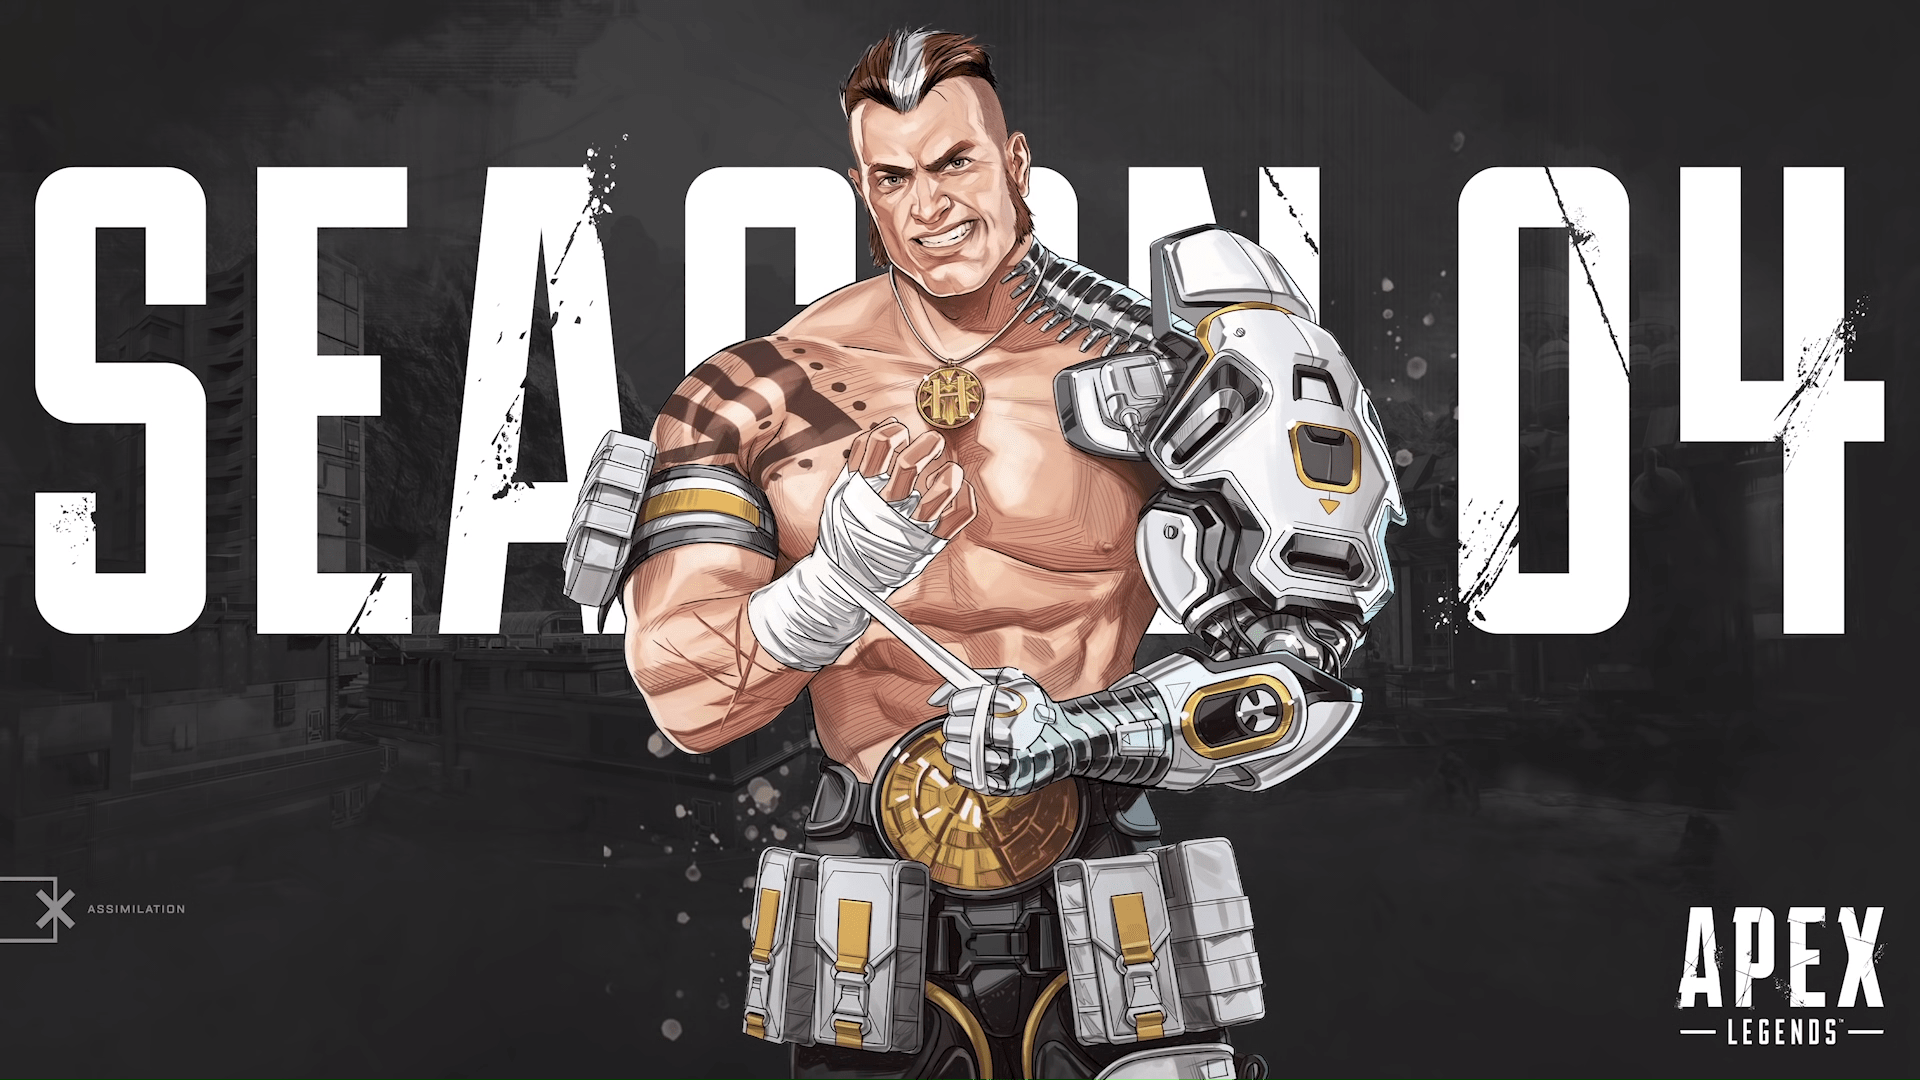 Forge Is Apex Legend’s New Legend For Season 4, But Will Revenant Still Make An Appearance?